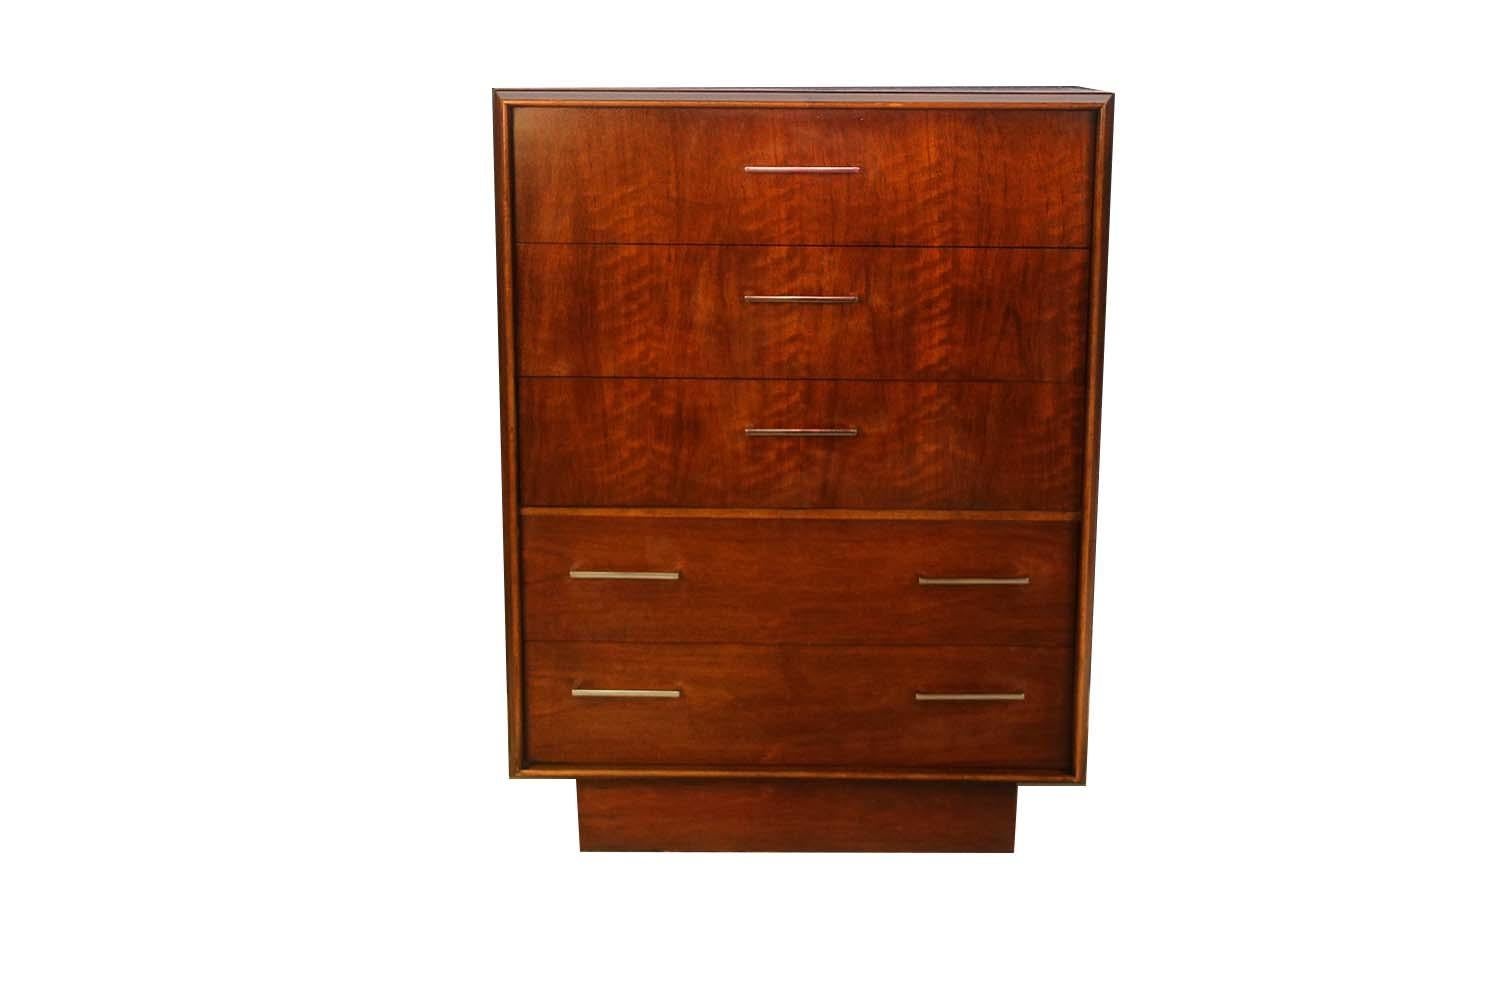 This is a beautiful example of midcentury craftsmanship by Lane furniture, circa 1960s. This retro piece features top of the line hardware, and excellently crafted woodwork. with beautiful walnut veneer. Drawers are dovetail construction with